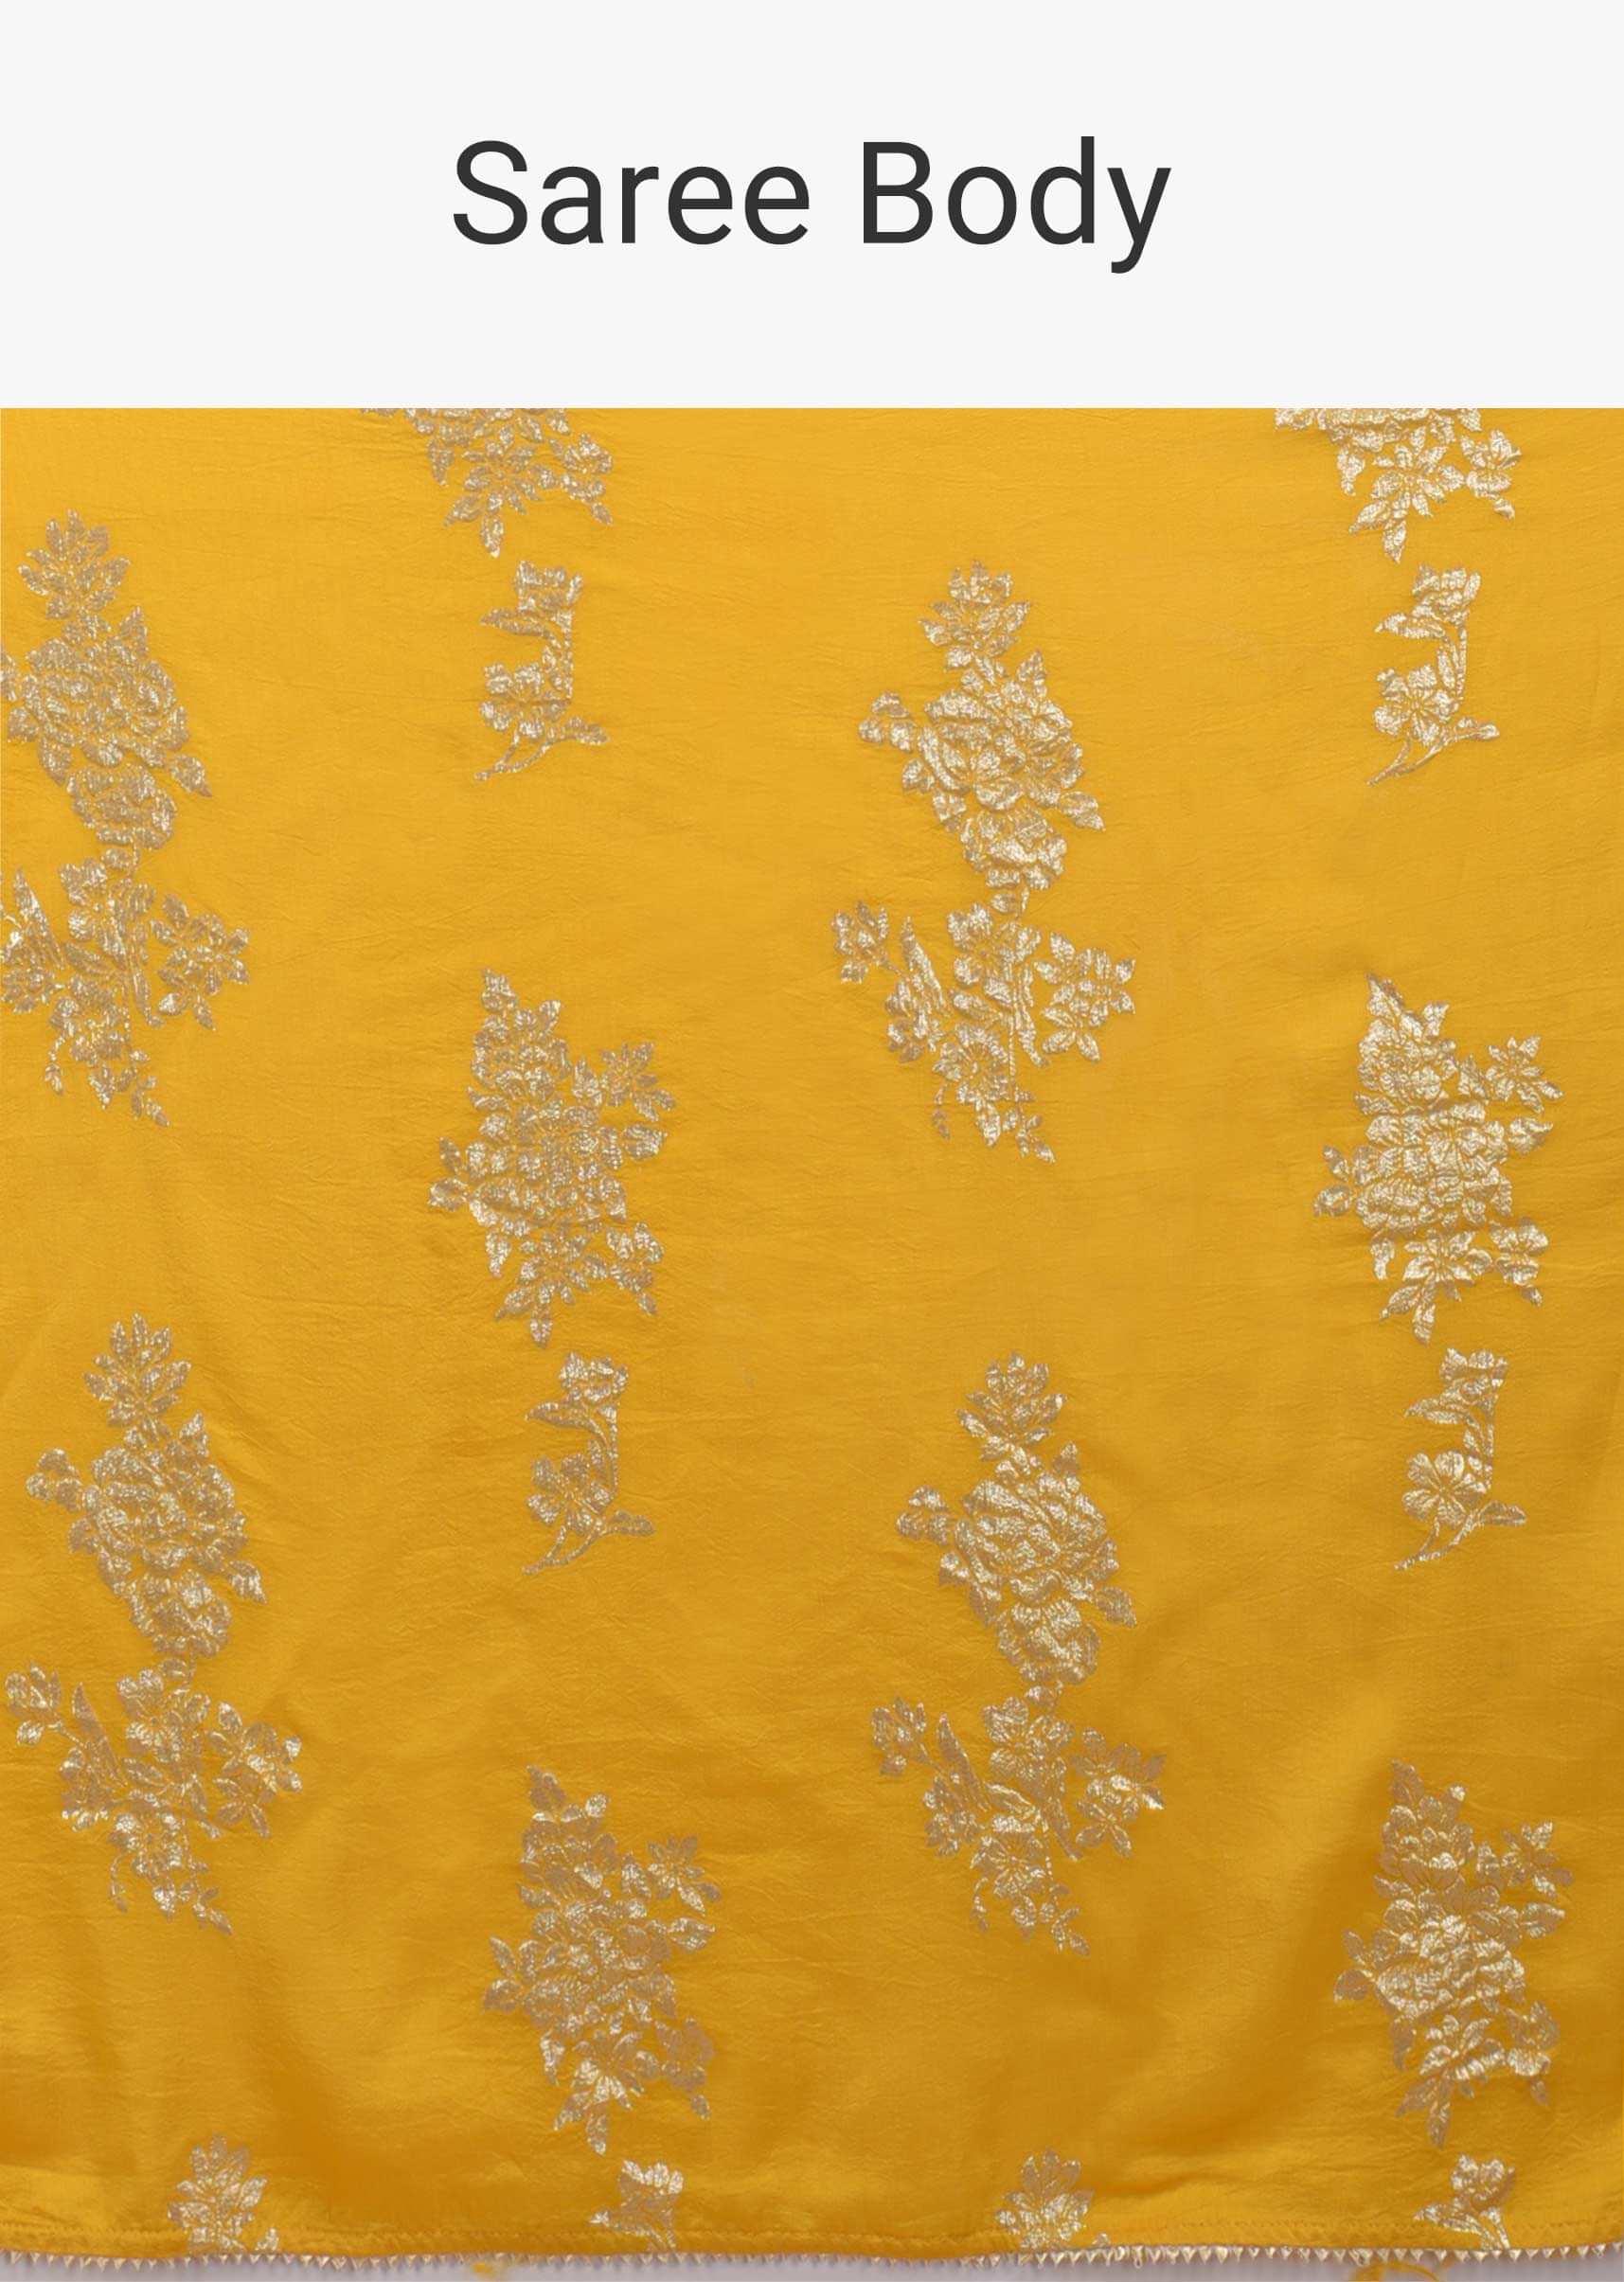 Dandelion Yellow Saree In Silk With Weaved Floral Motifs In Repeat Pattern